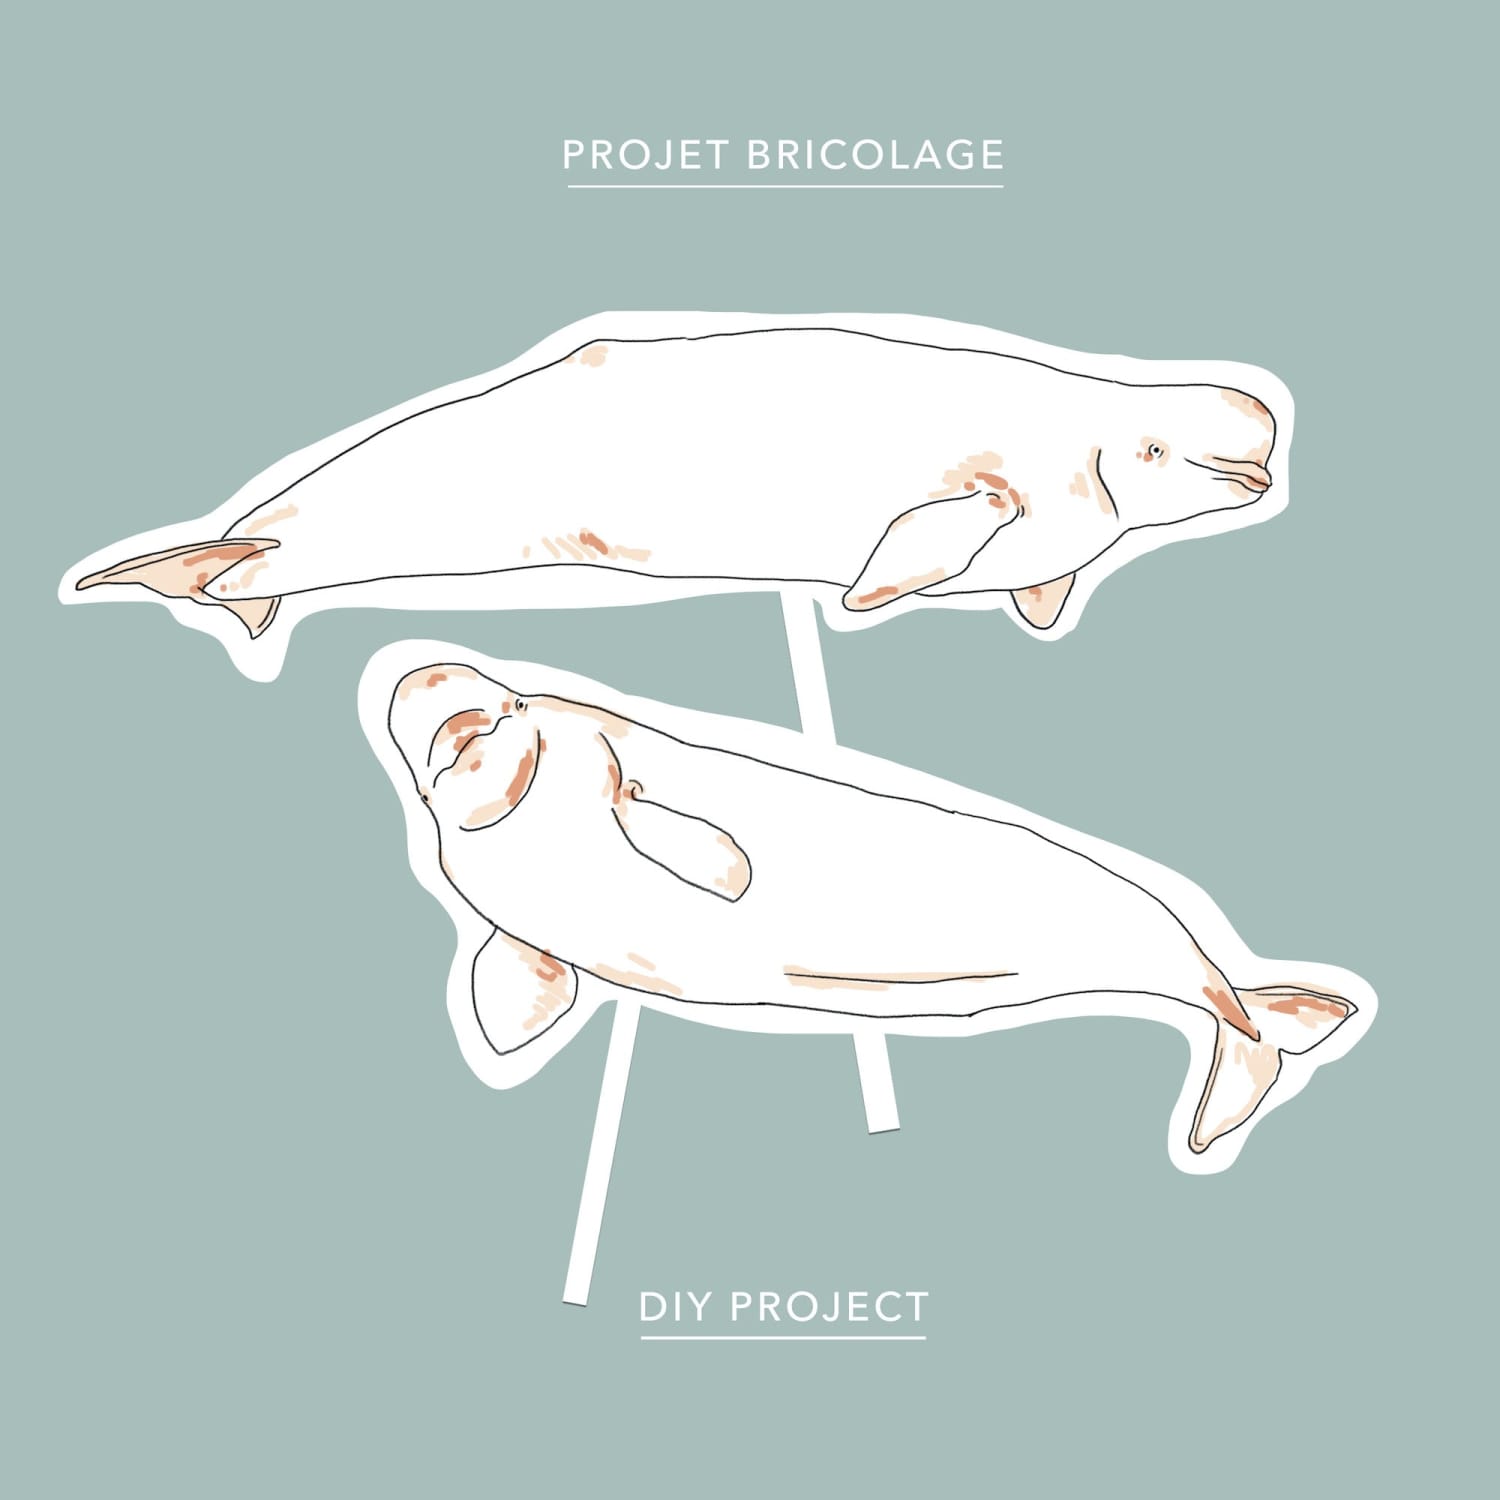 A free DIY Beluga puppet download, by the Baltic Club